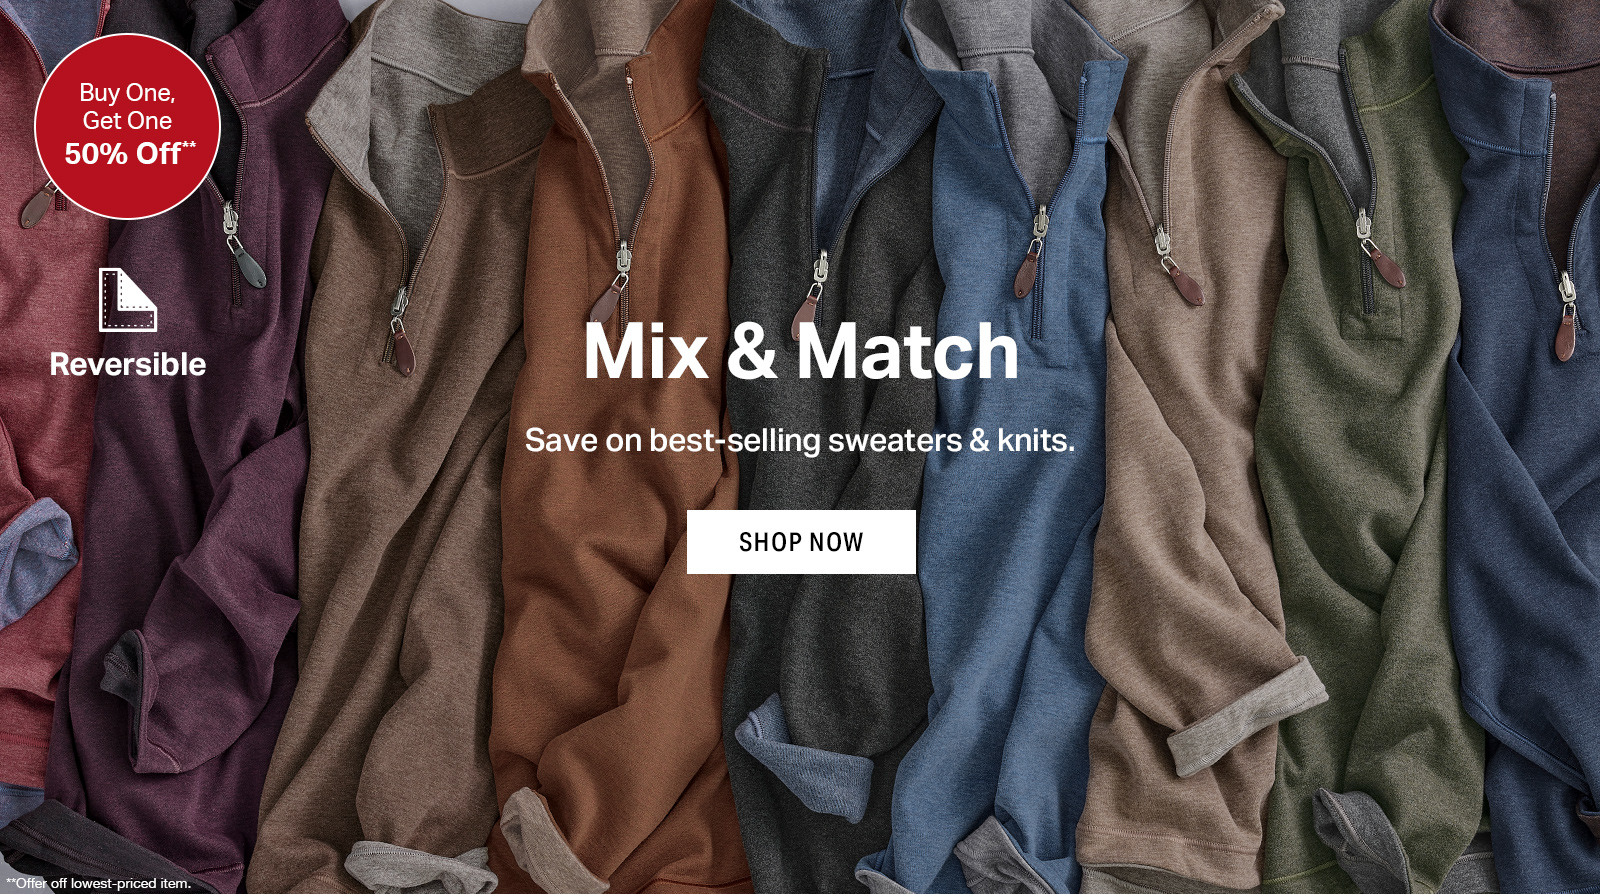 Shop Sweaters and Knits - Buy One, Get One 50% Off